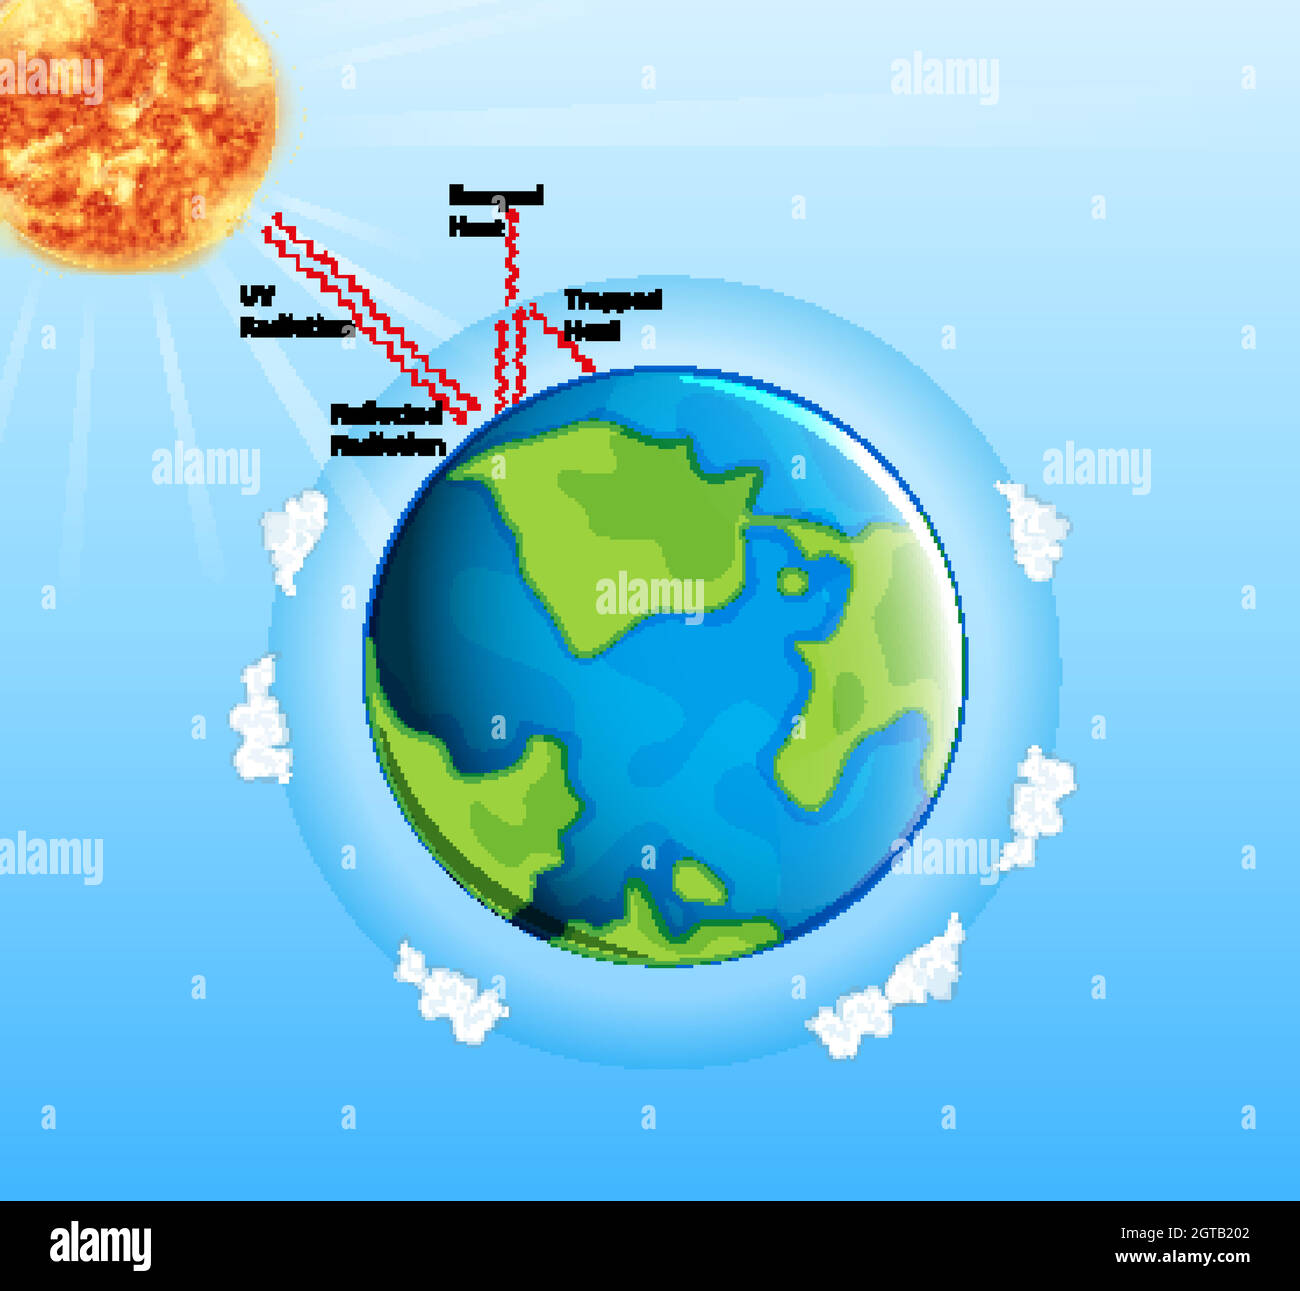 Global warming poster with earth on fire Vector Image